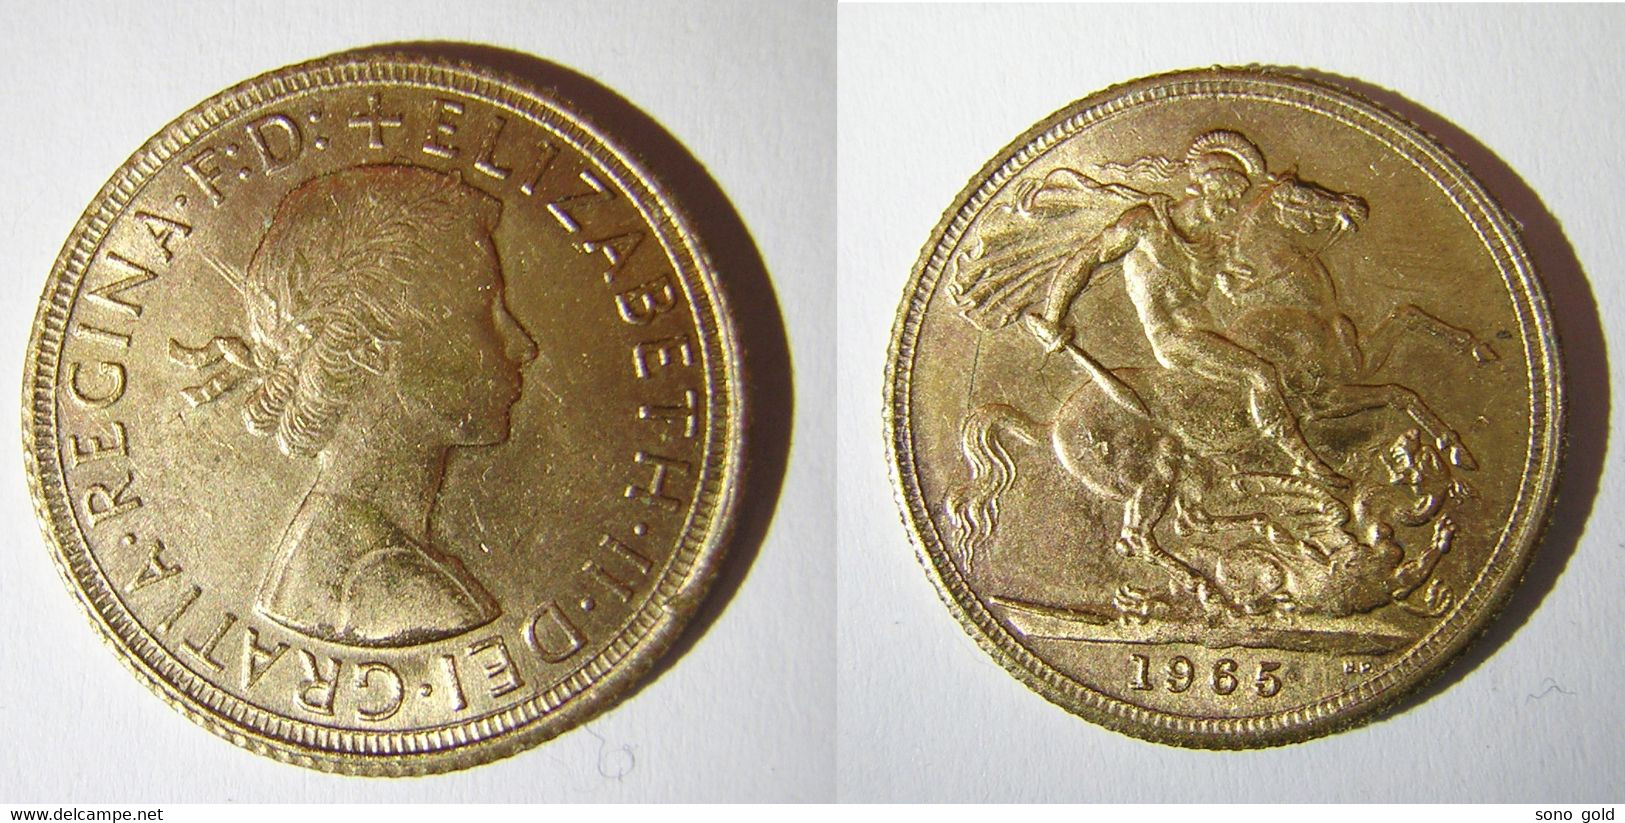 VERY NICE 1965 Sovereign Gold Sterling FAKE - A Identifier